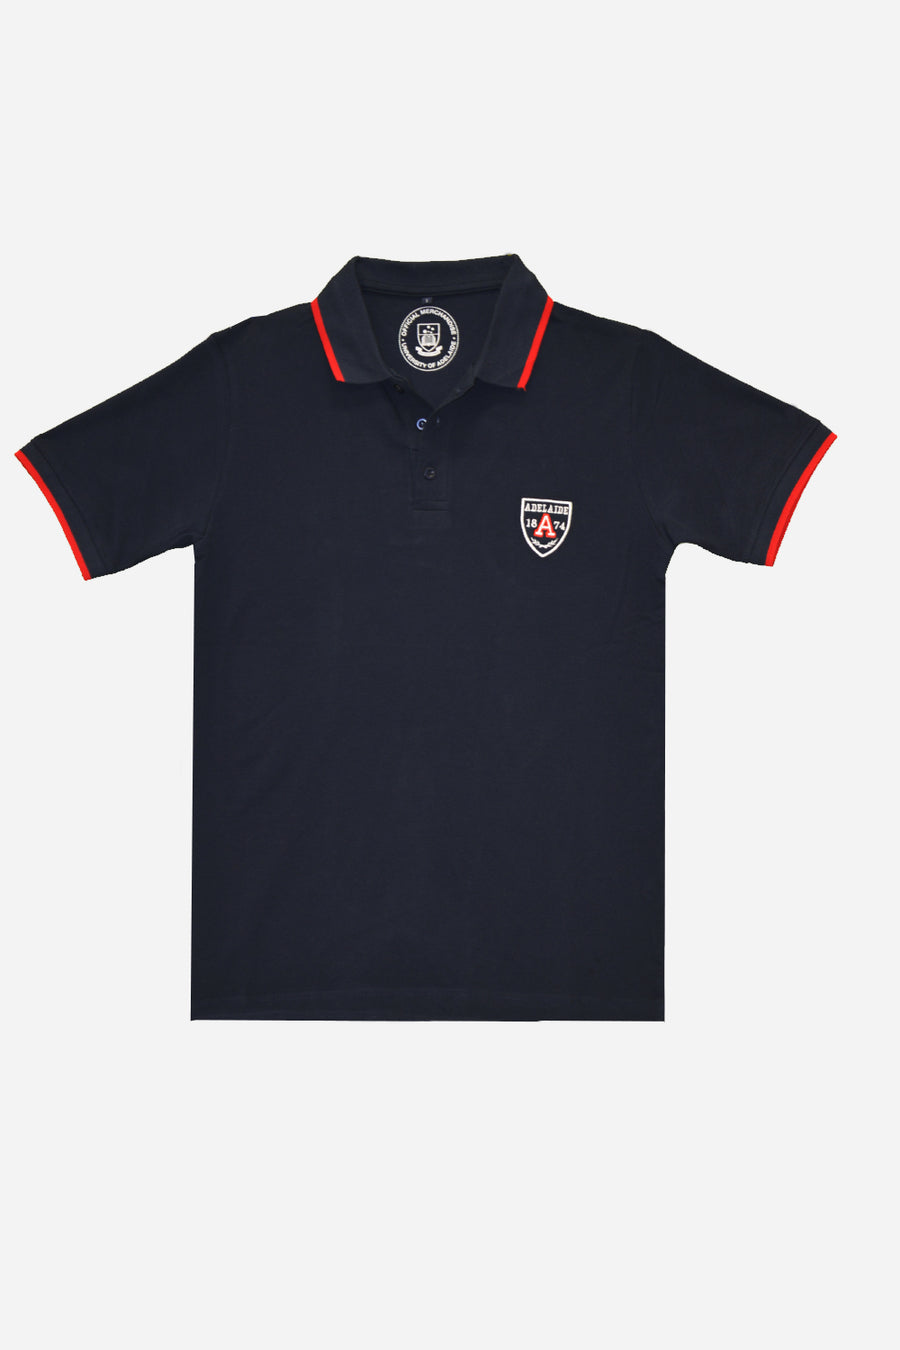 University Heritage Polo - Limited Edition - The Adelaide Store